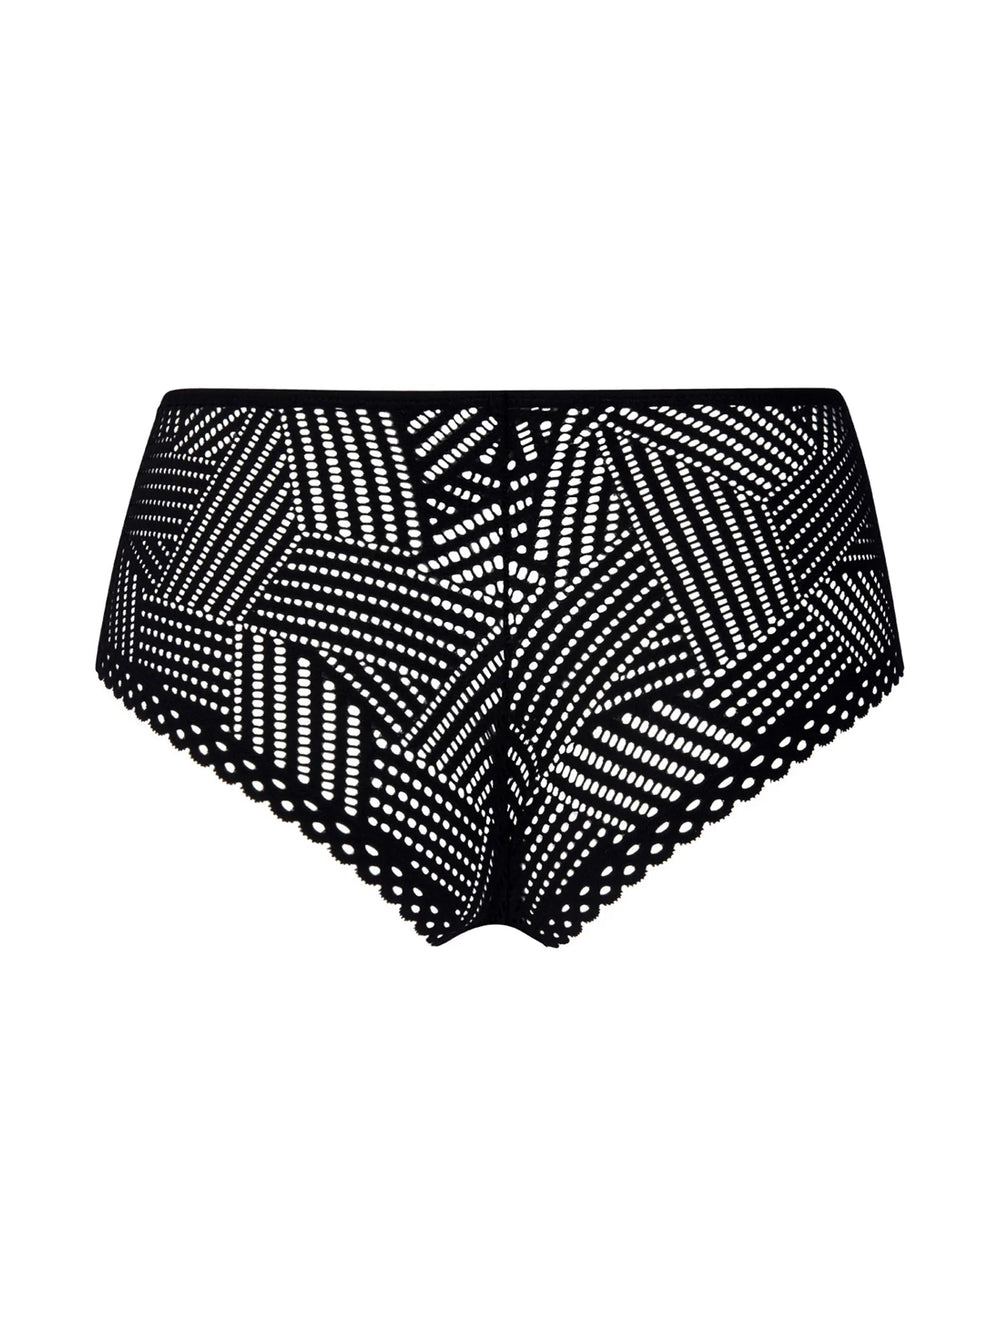 Antigel By Lise Charmel Tressage Graphic Boyshort - Tressage Noir Shorty Antigel de Lise Charmel